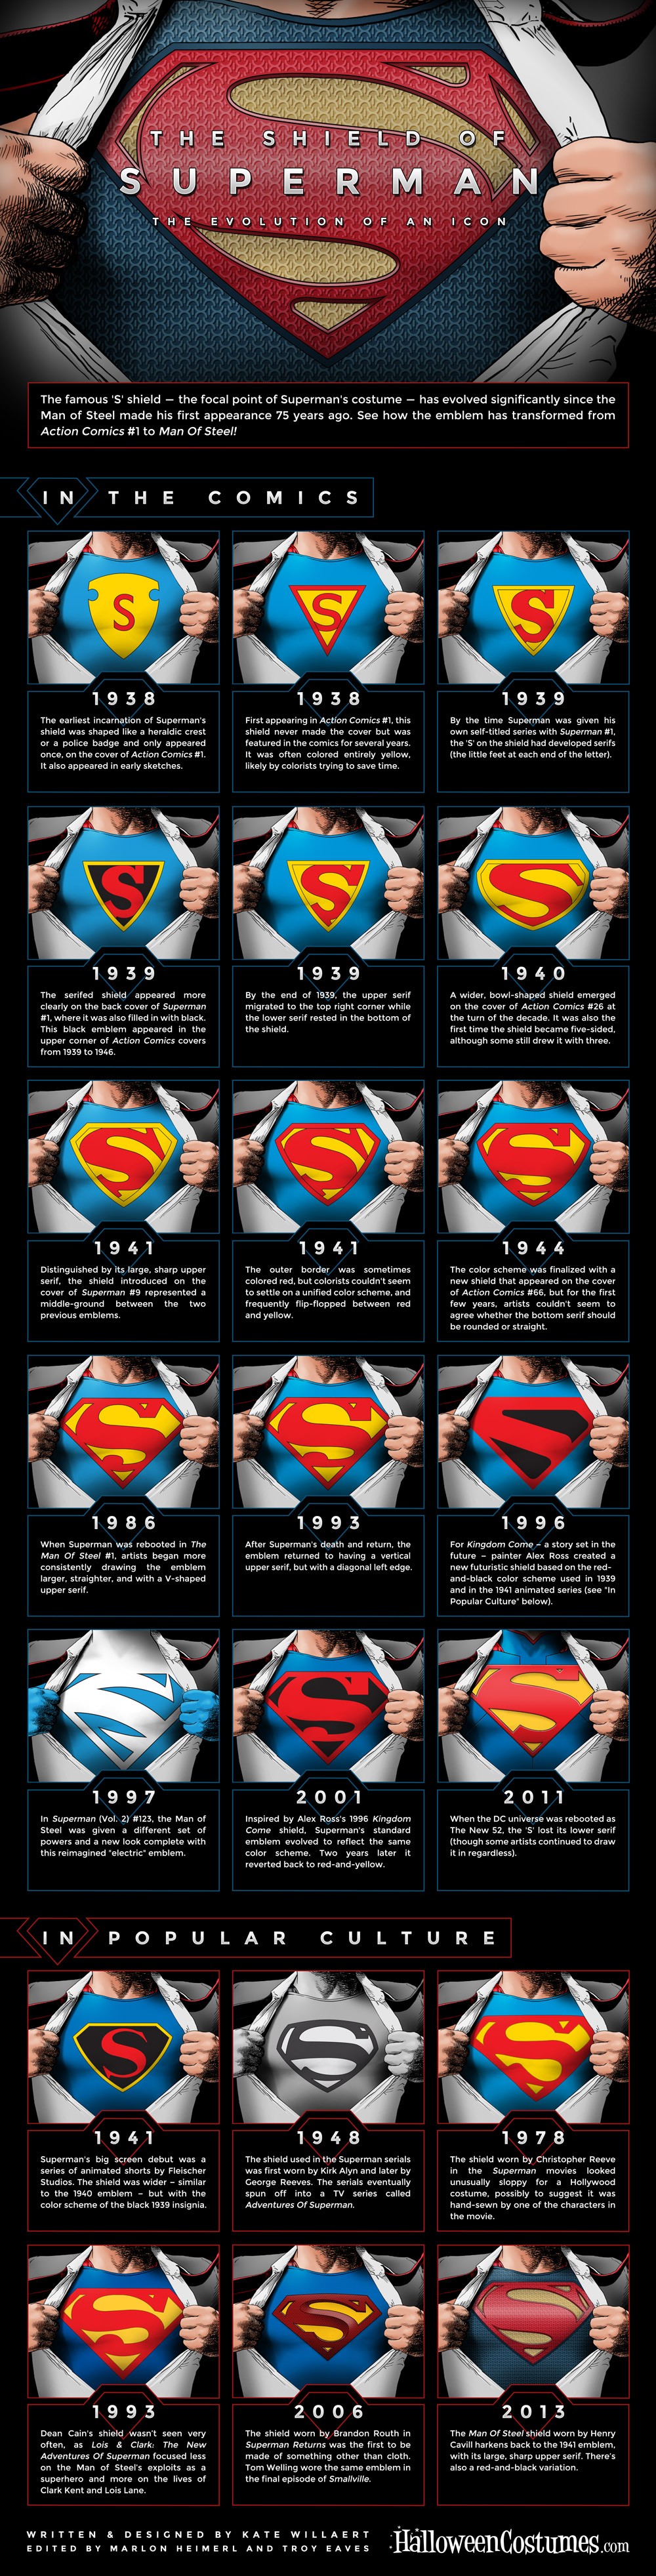 HalloweenCostumes.com: The Shield of Superman: The Evolution of an Icon